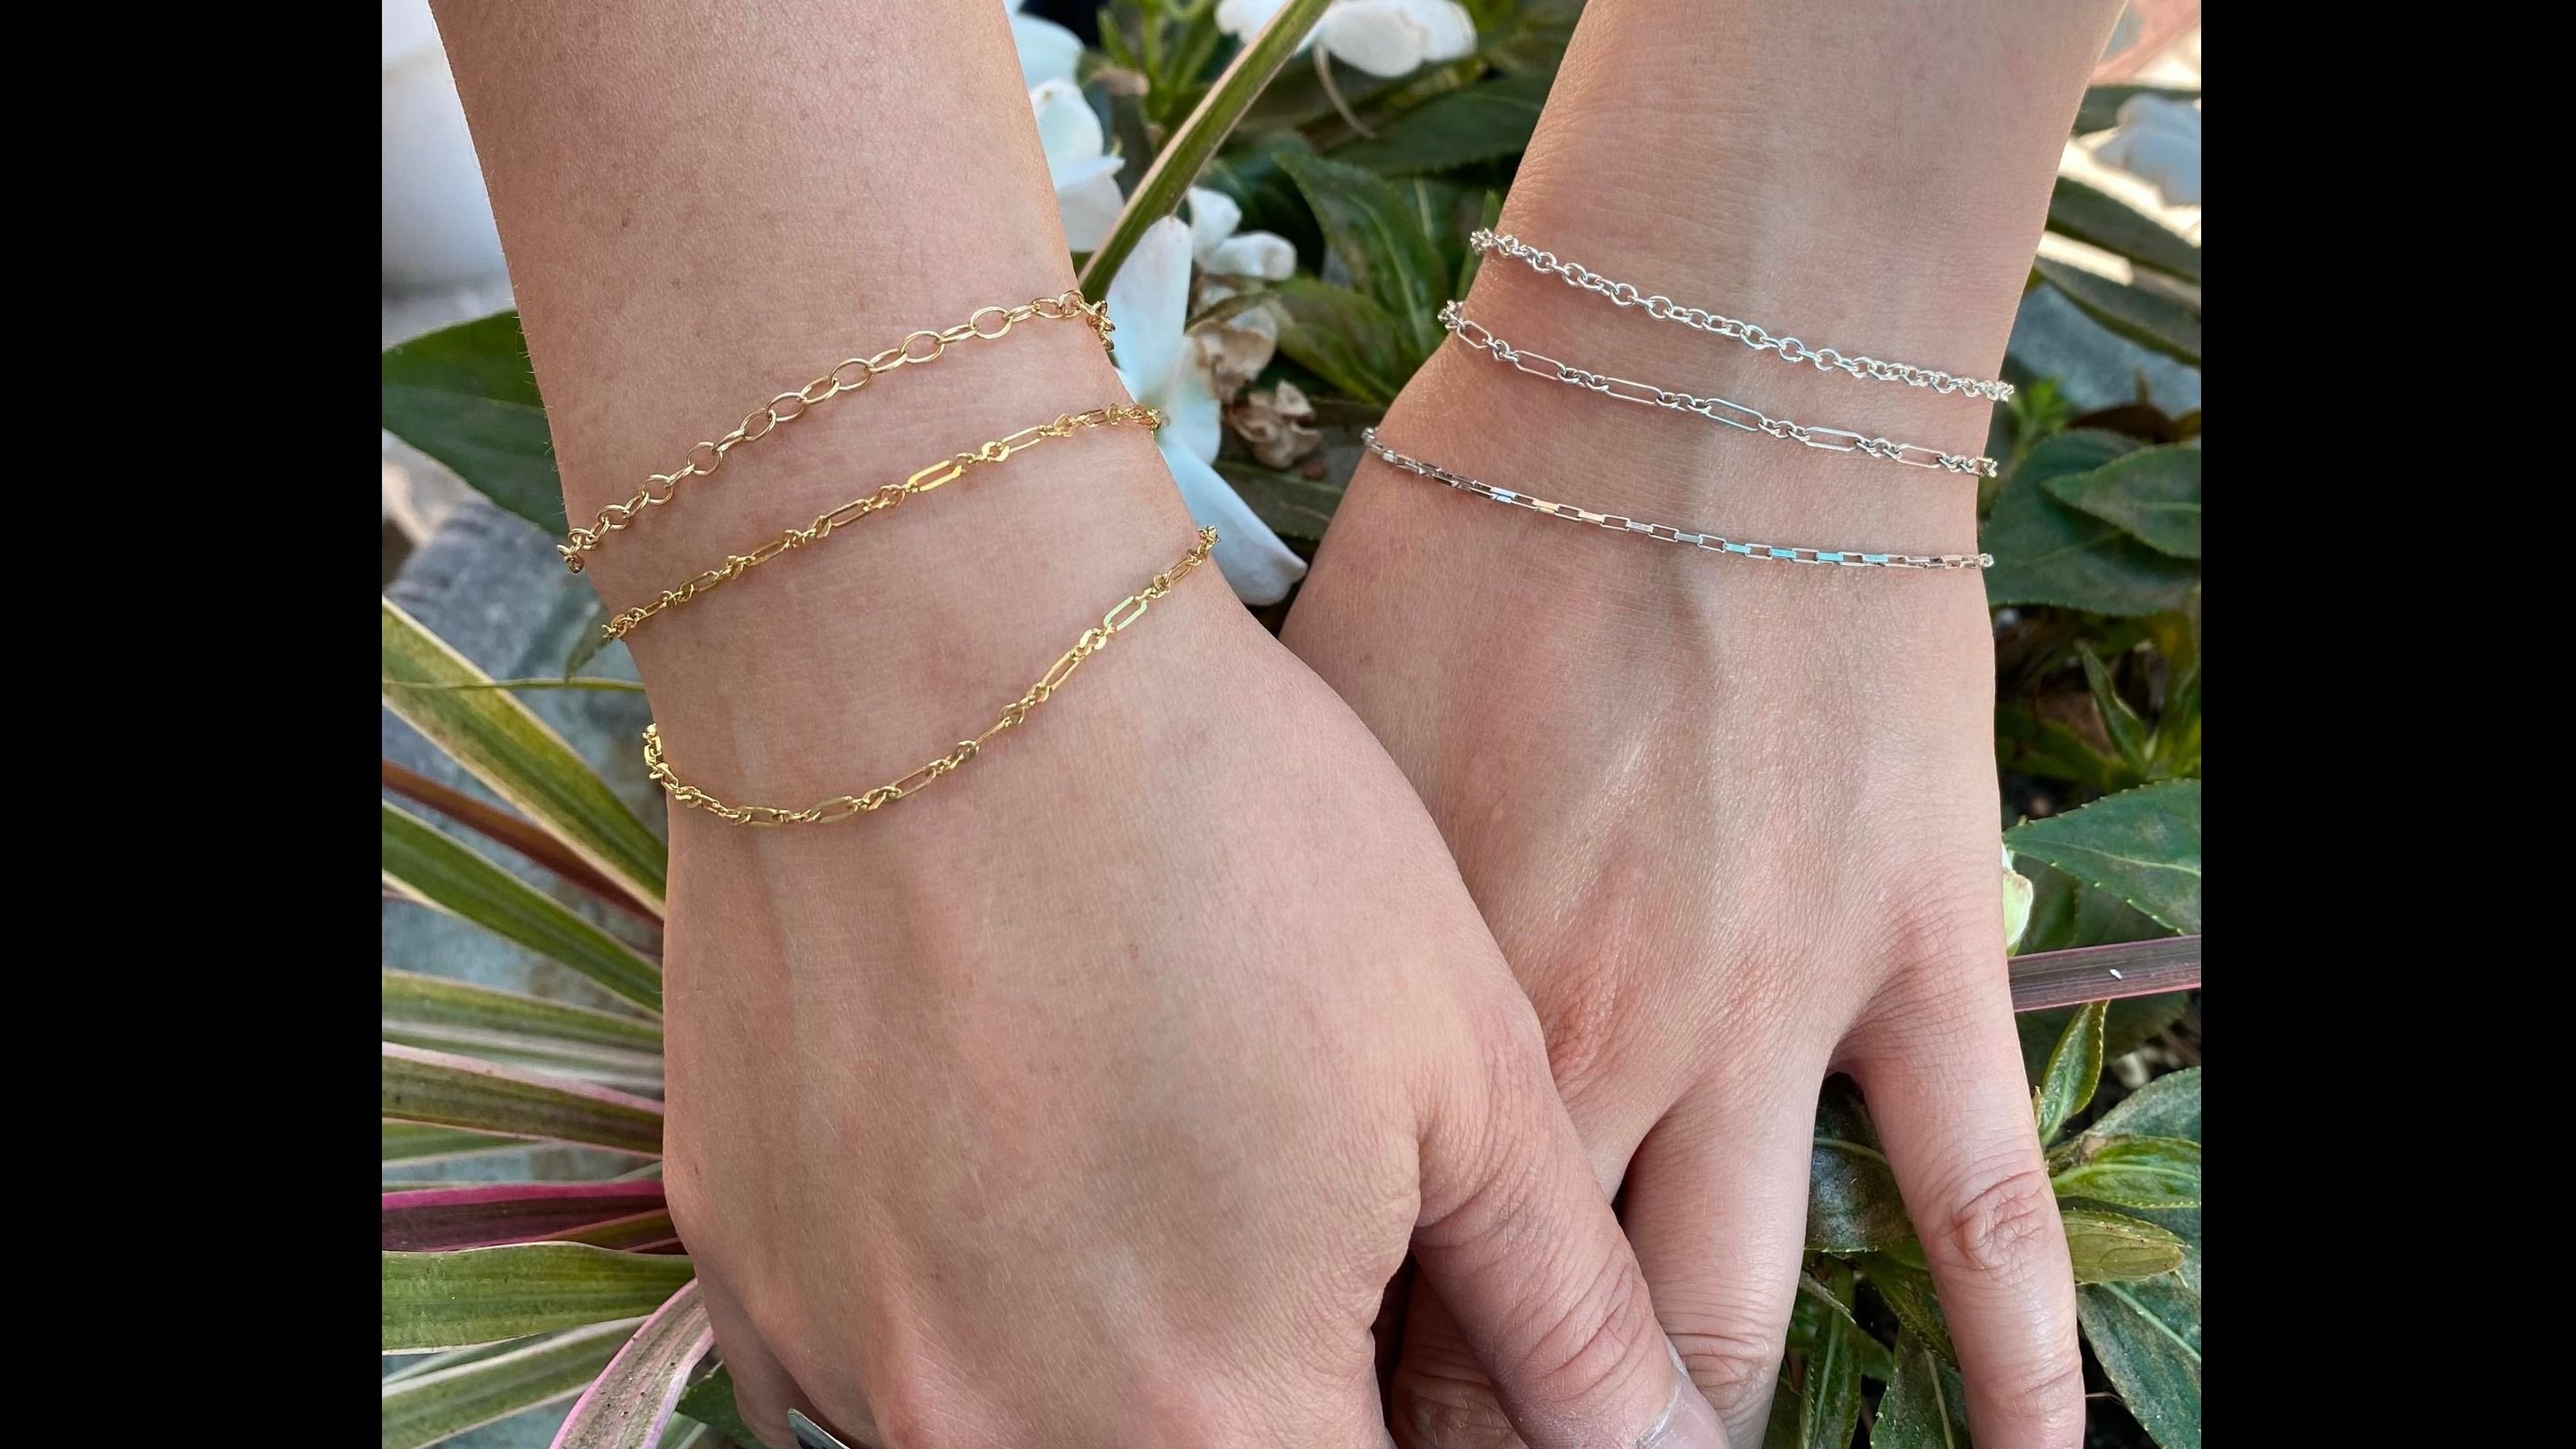 Forever Bracelets Are The New Trend In Celebrating a Bond